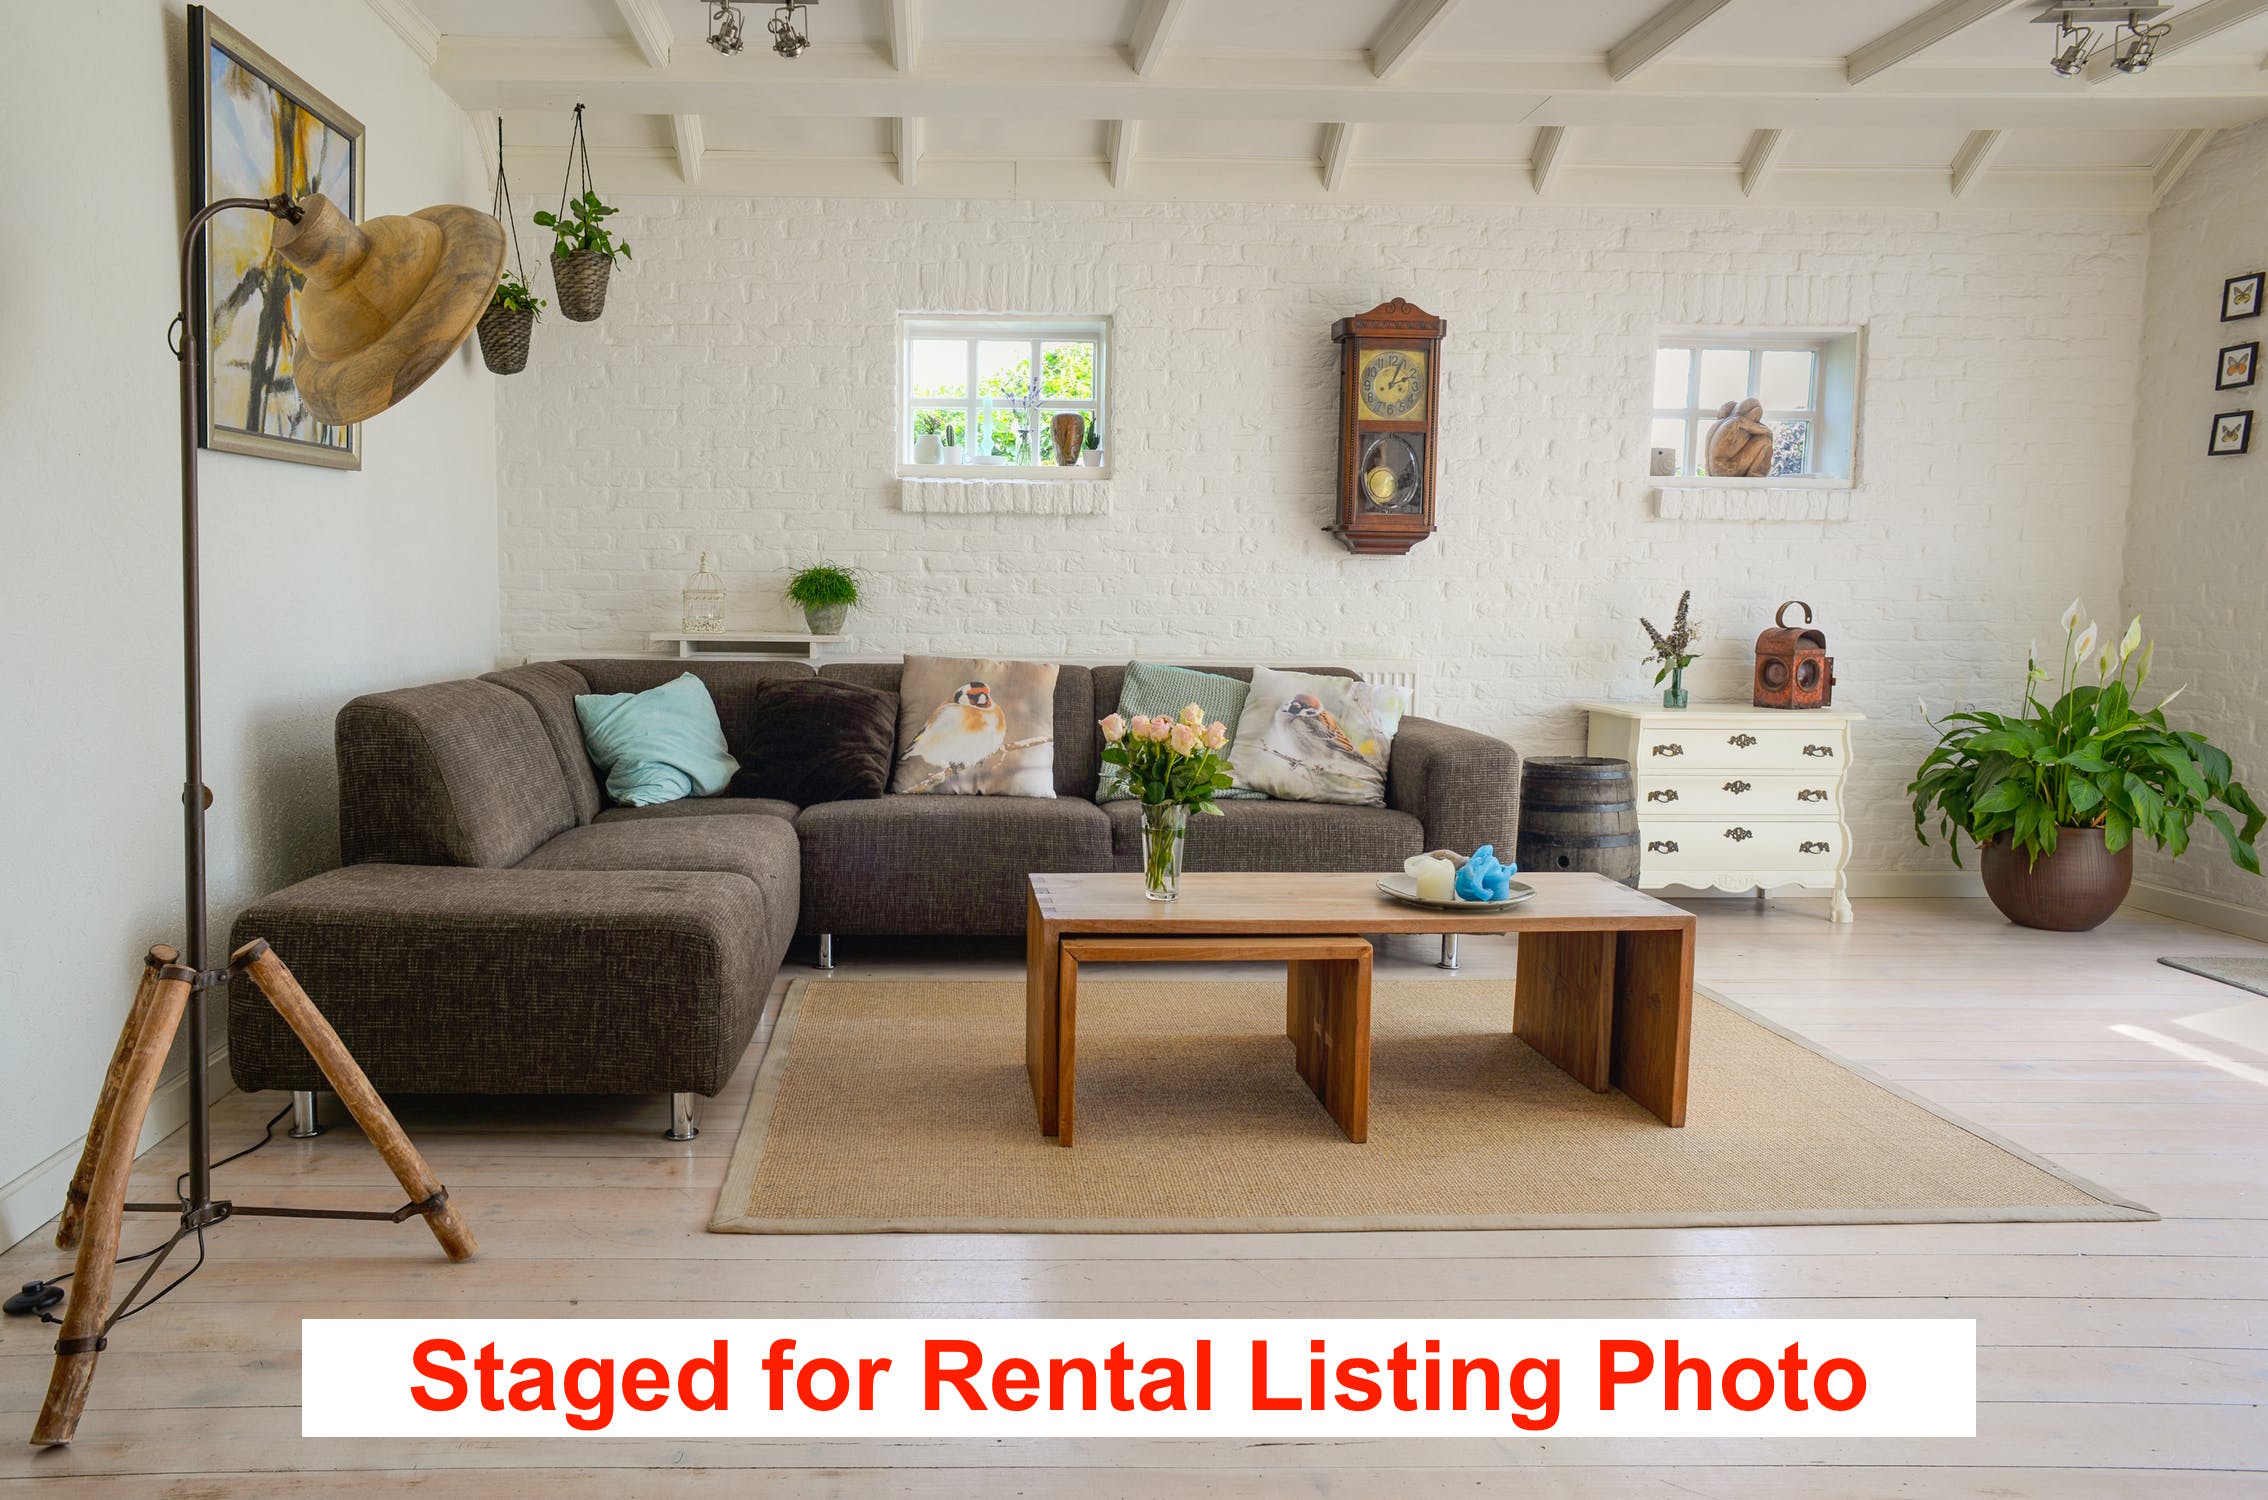 Example of Staged Home for Rental Listing Photo